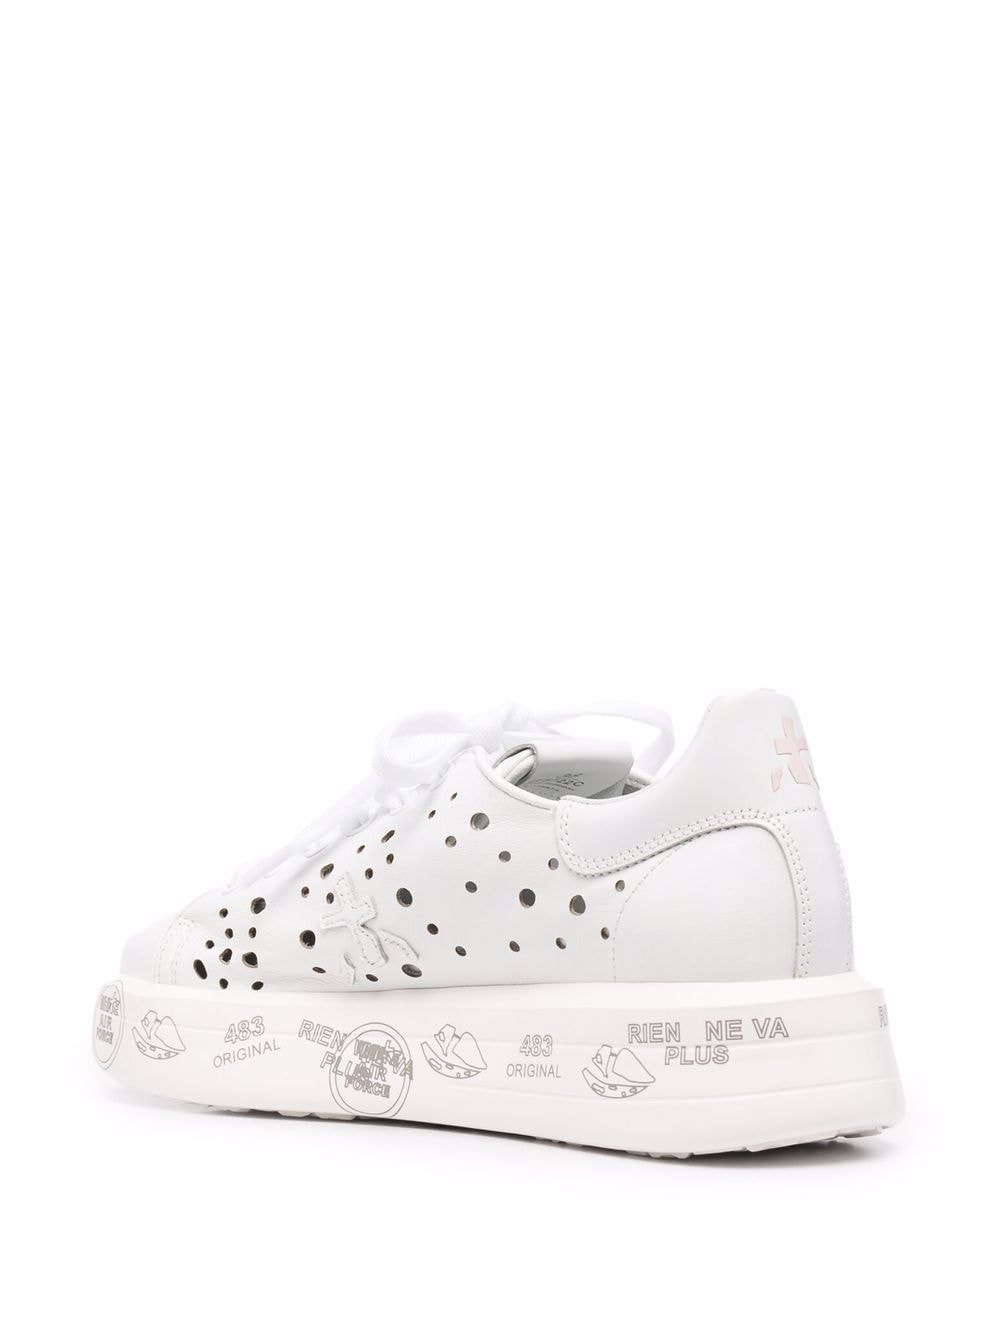 Premiata Belle Perforated Sneakers - Farfetch